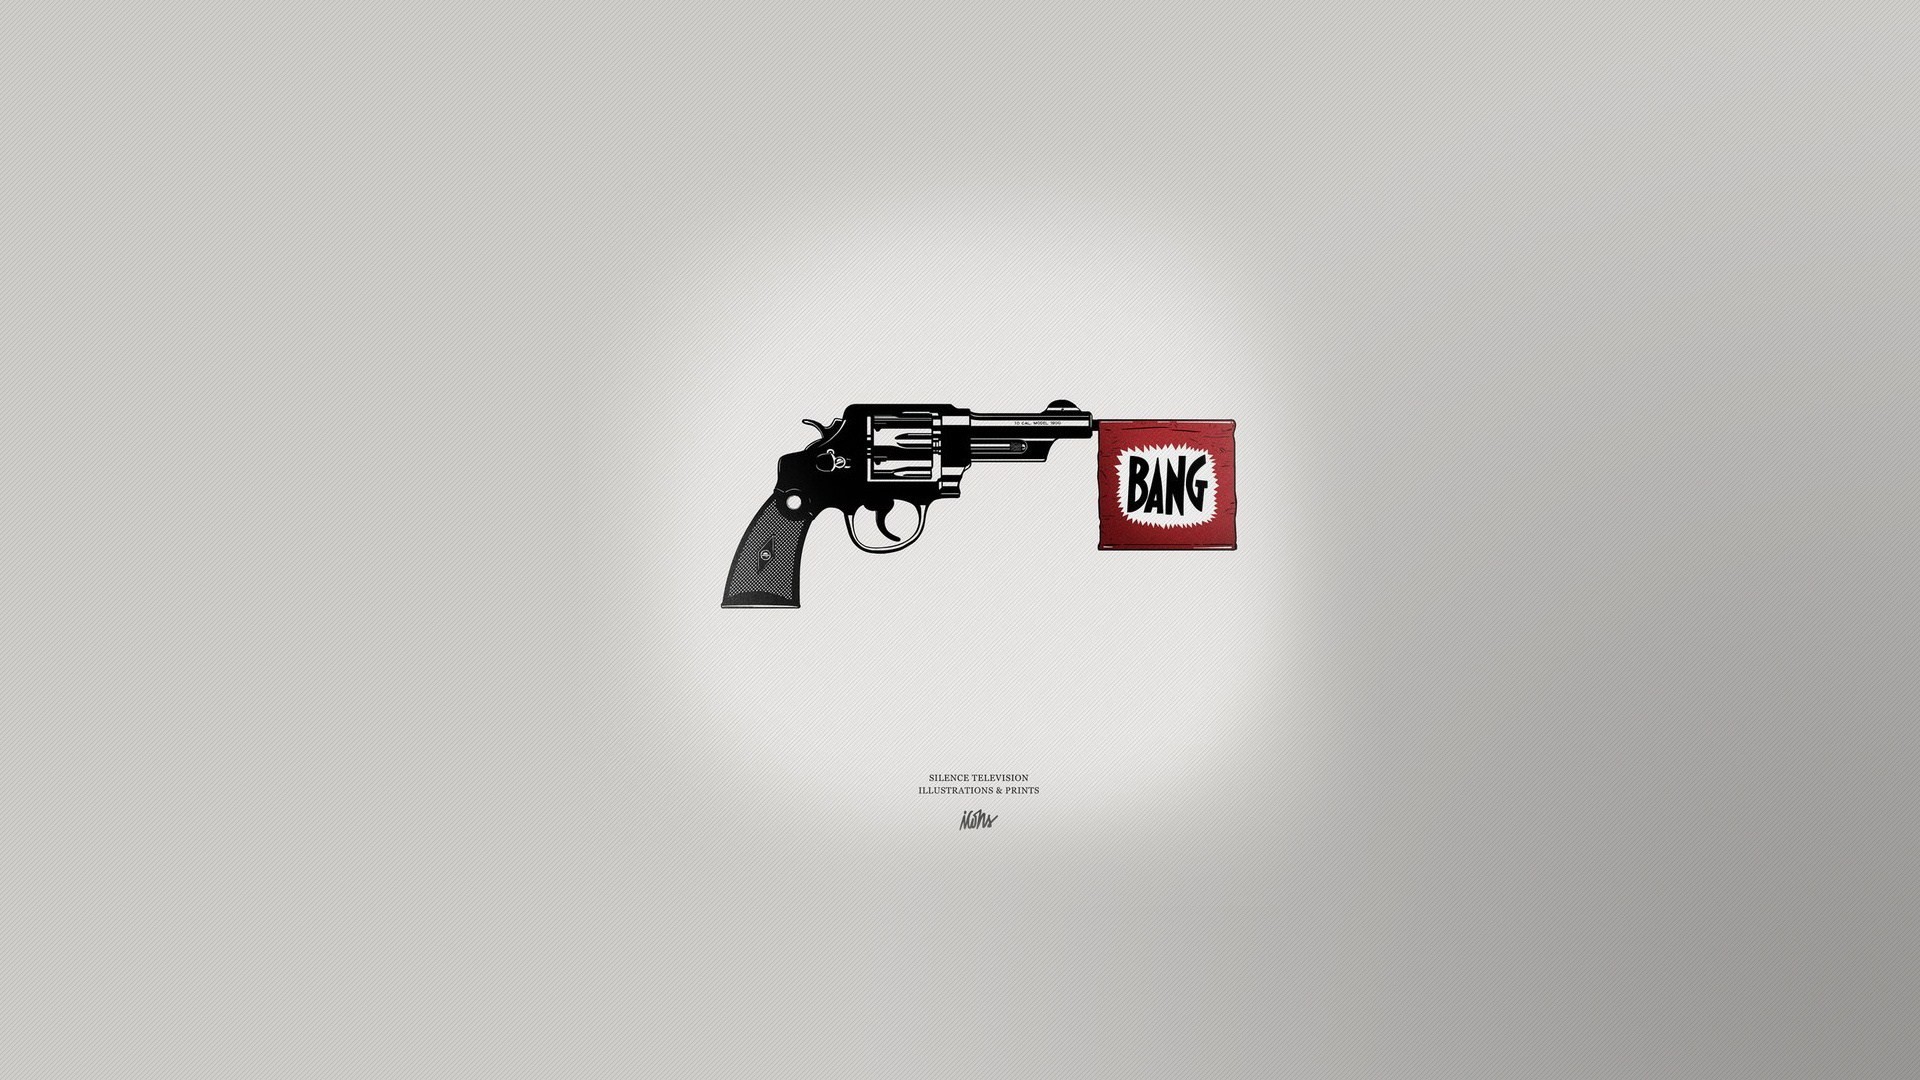 Gianmarco Magnani, Silence Television, Minimalism, Artwork, Simple background, Weapon, Revolver Wallpaper